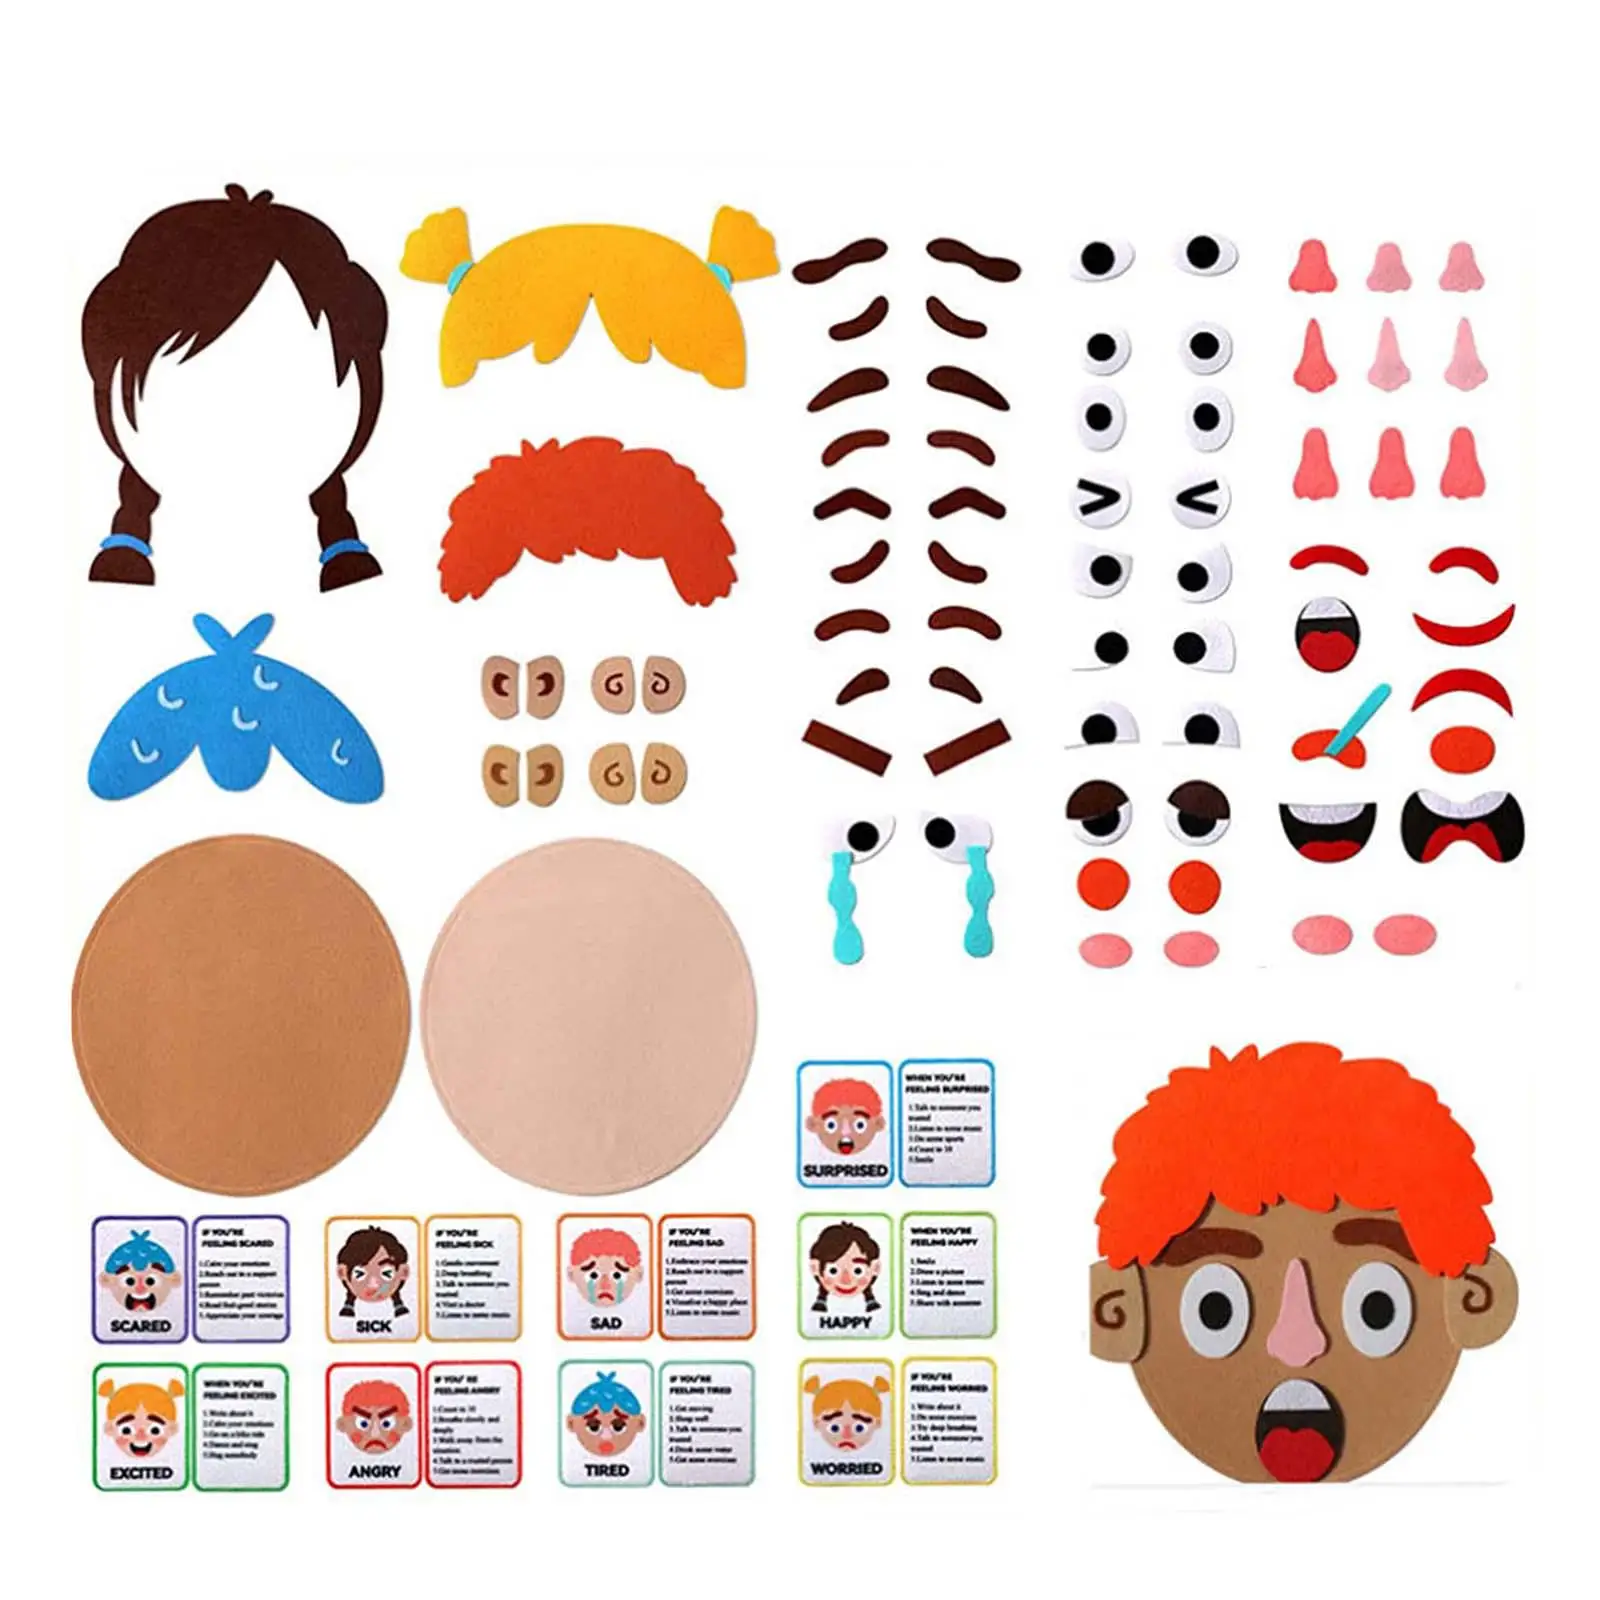 Social Emotional Learning Activities Sensory Toy Preschool Express Emotions Faces Games for Girls Kids Boys Toddlers Ages 3+